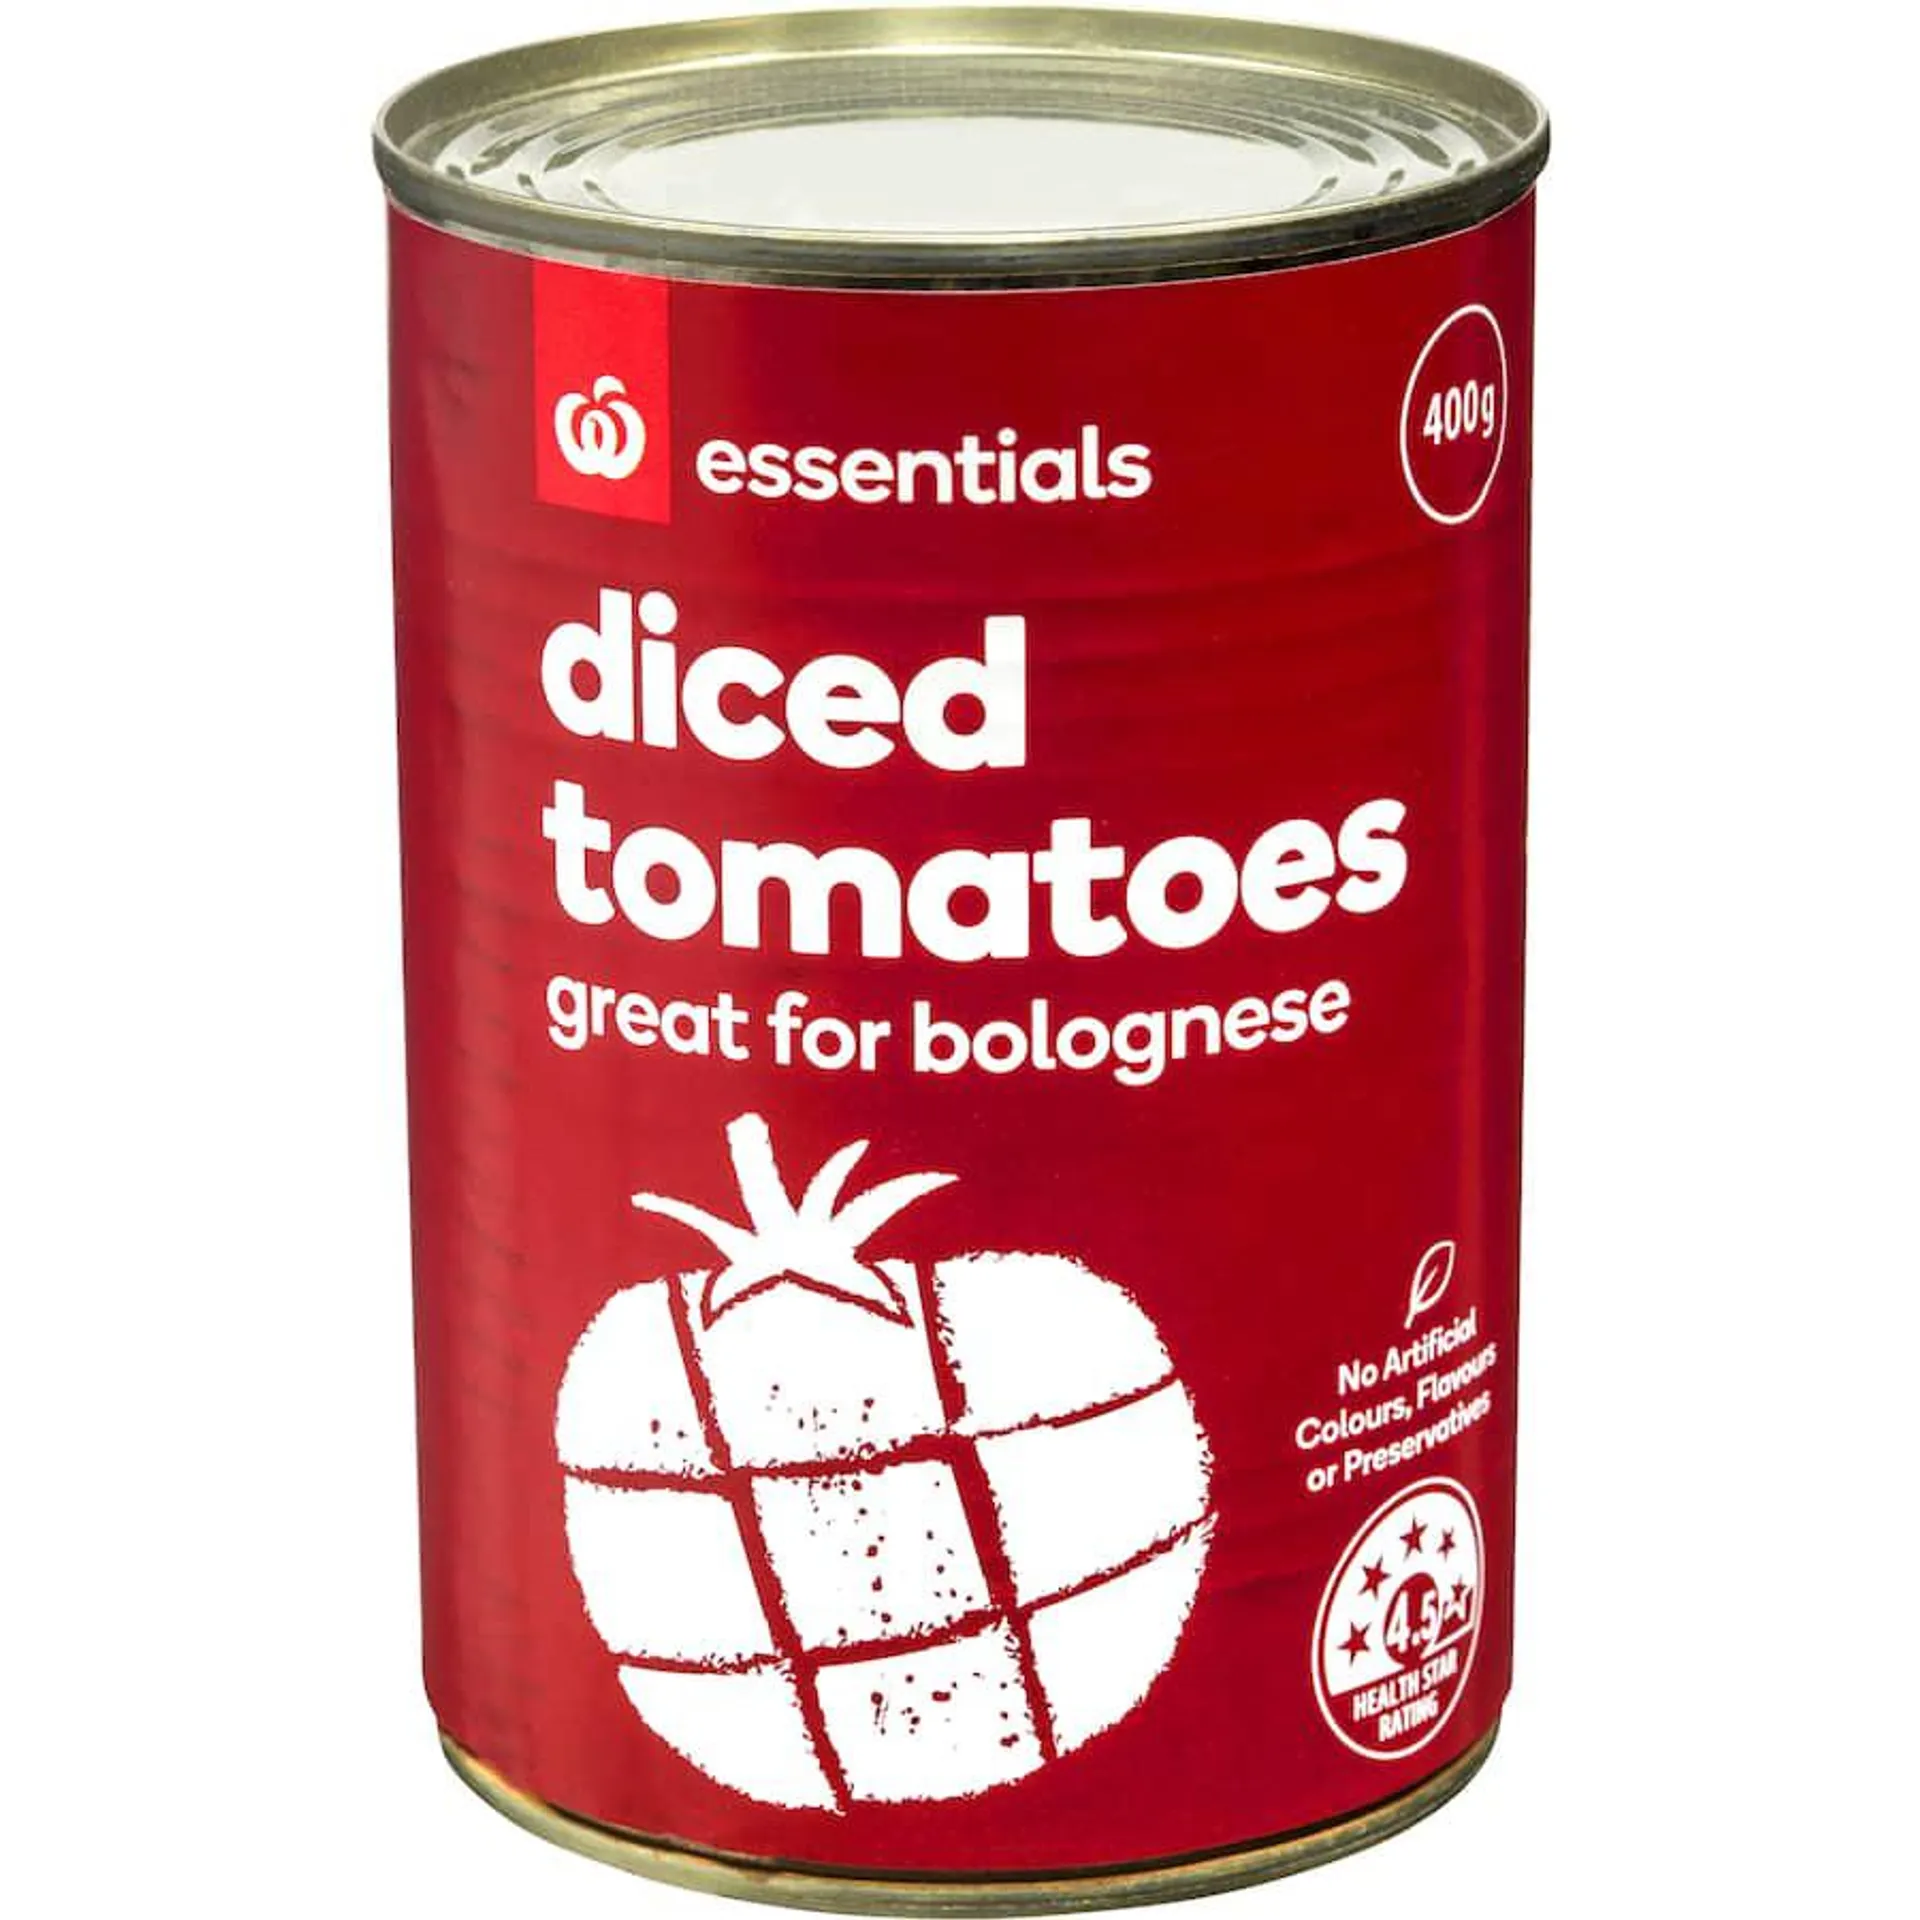 Essentials Diced Tomatoes